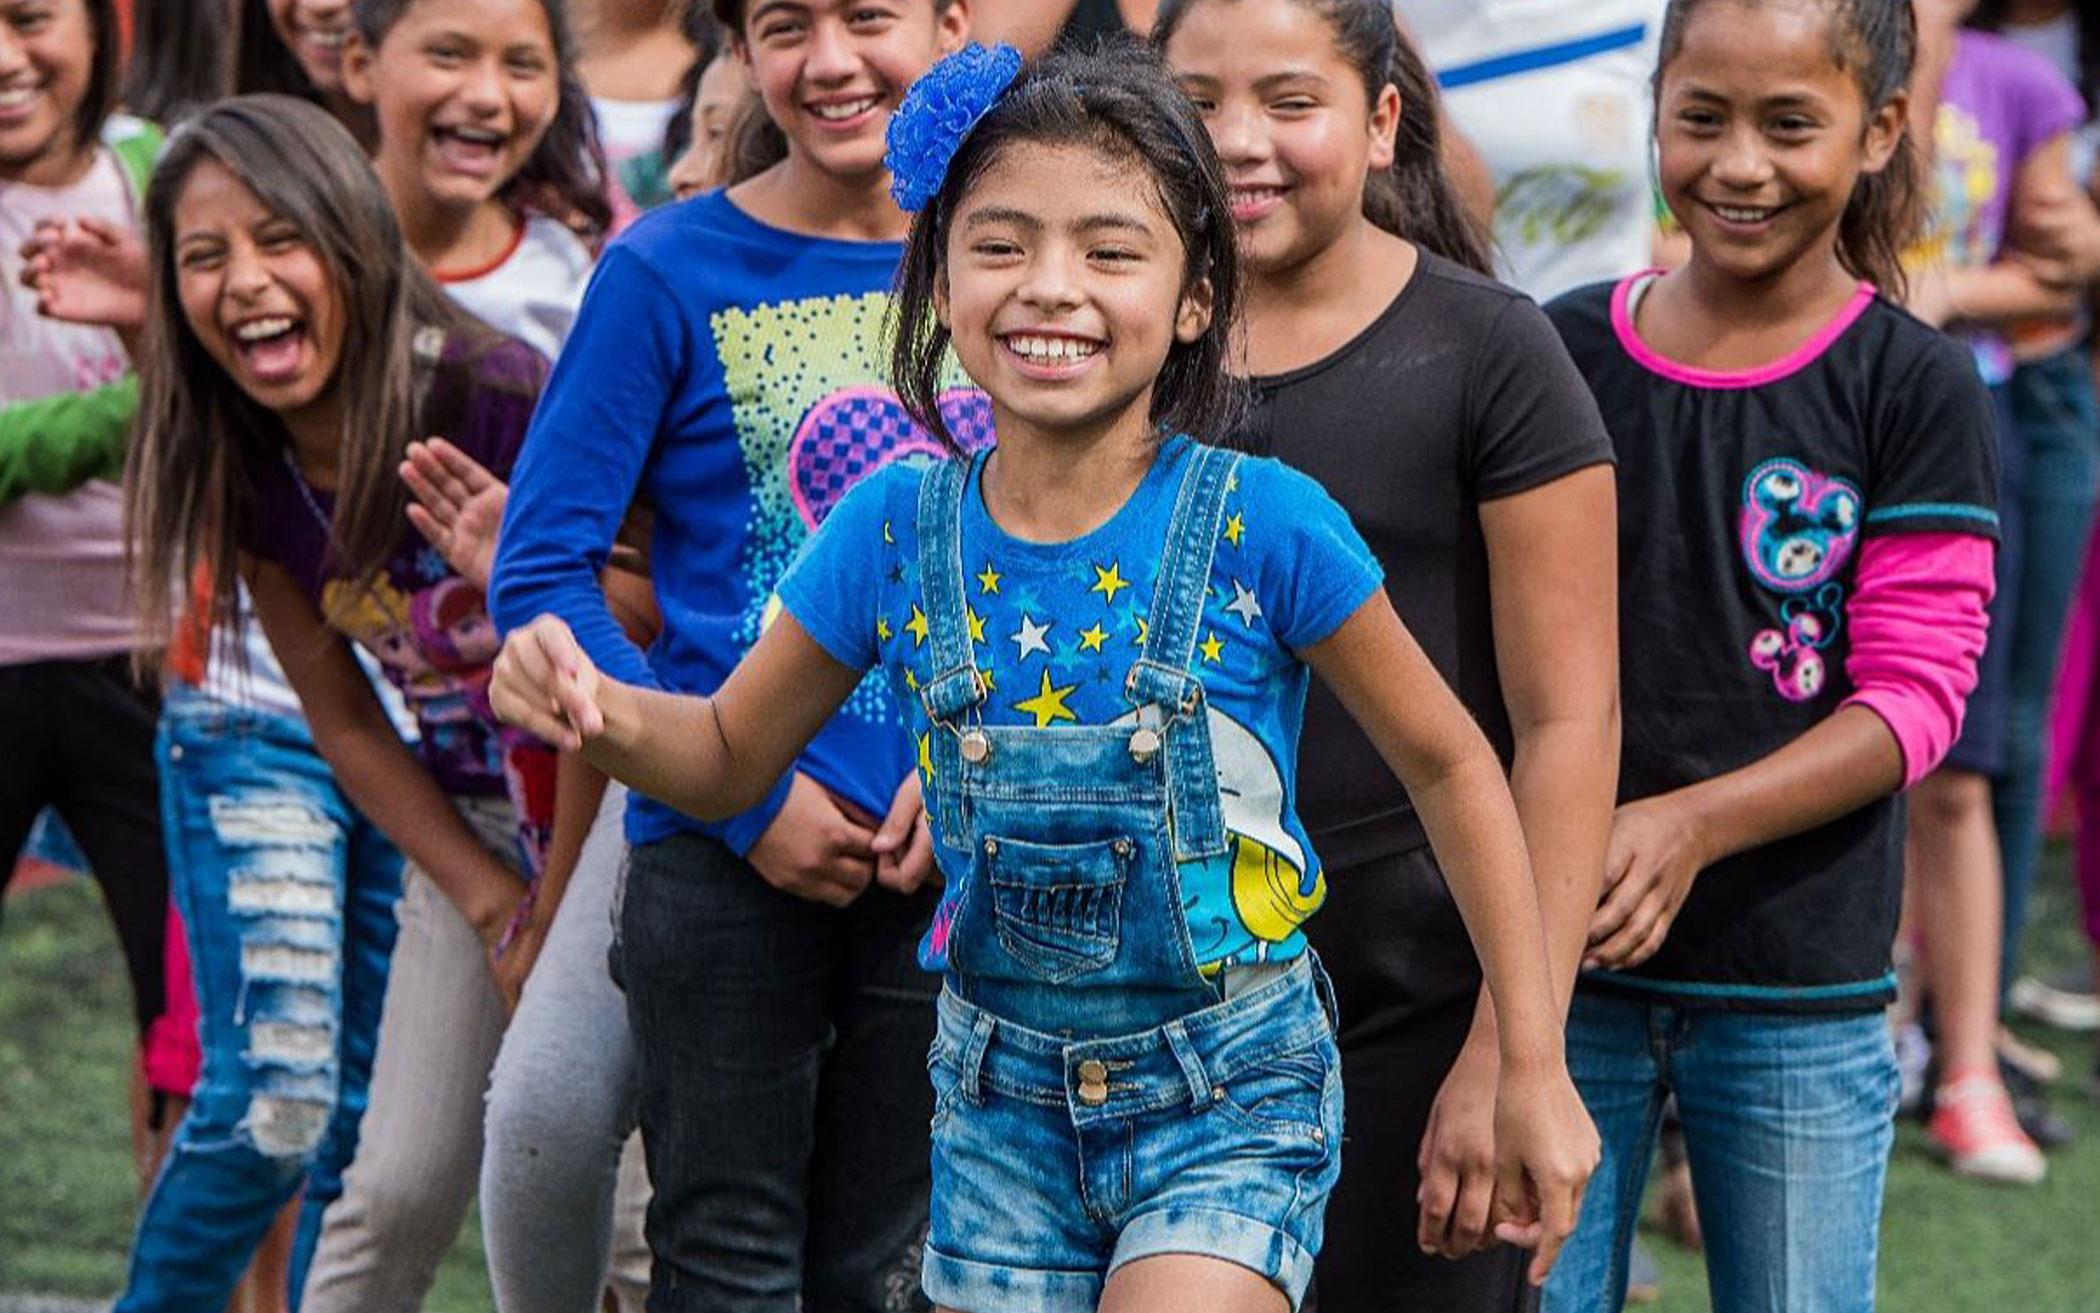 Young people from a Youth Impact Club in Honduras are helping to bring healing to their communities.